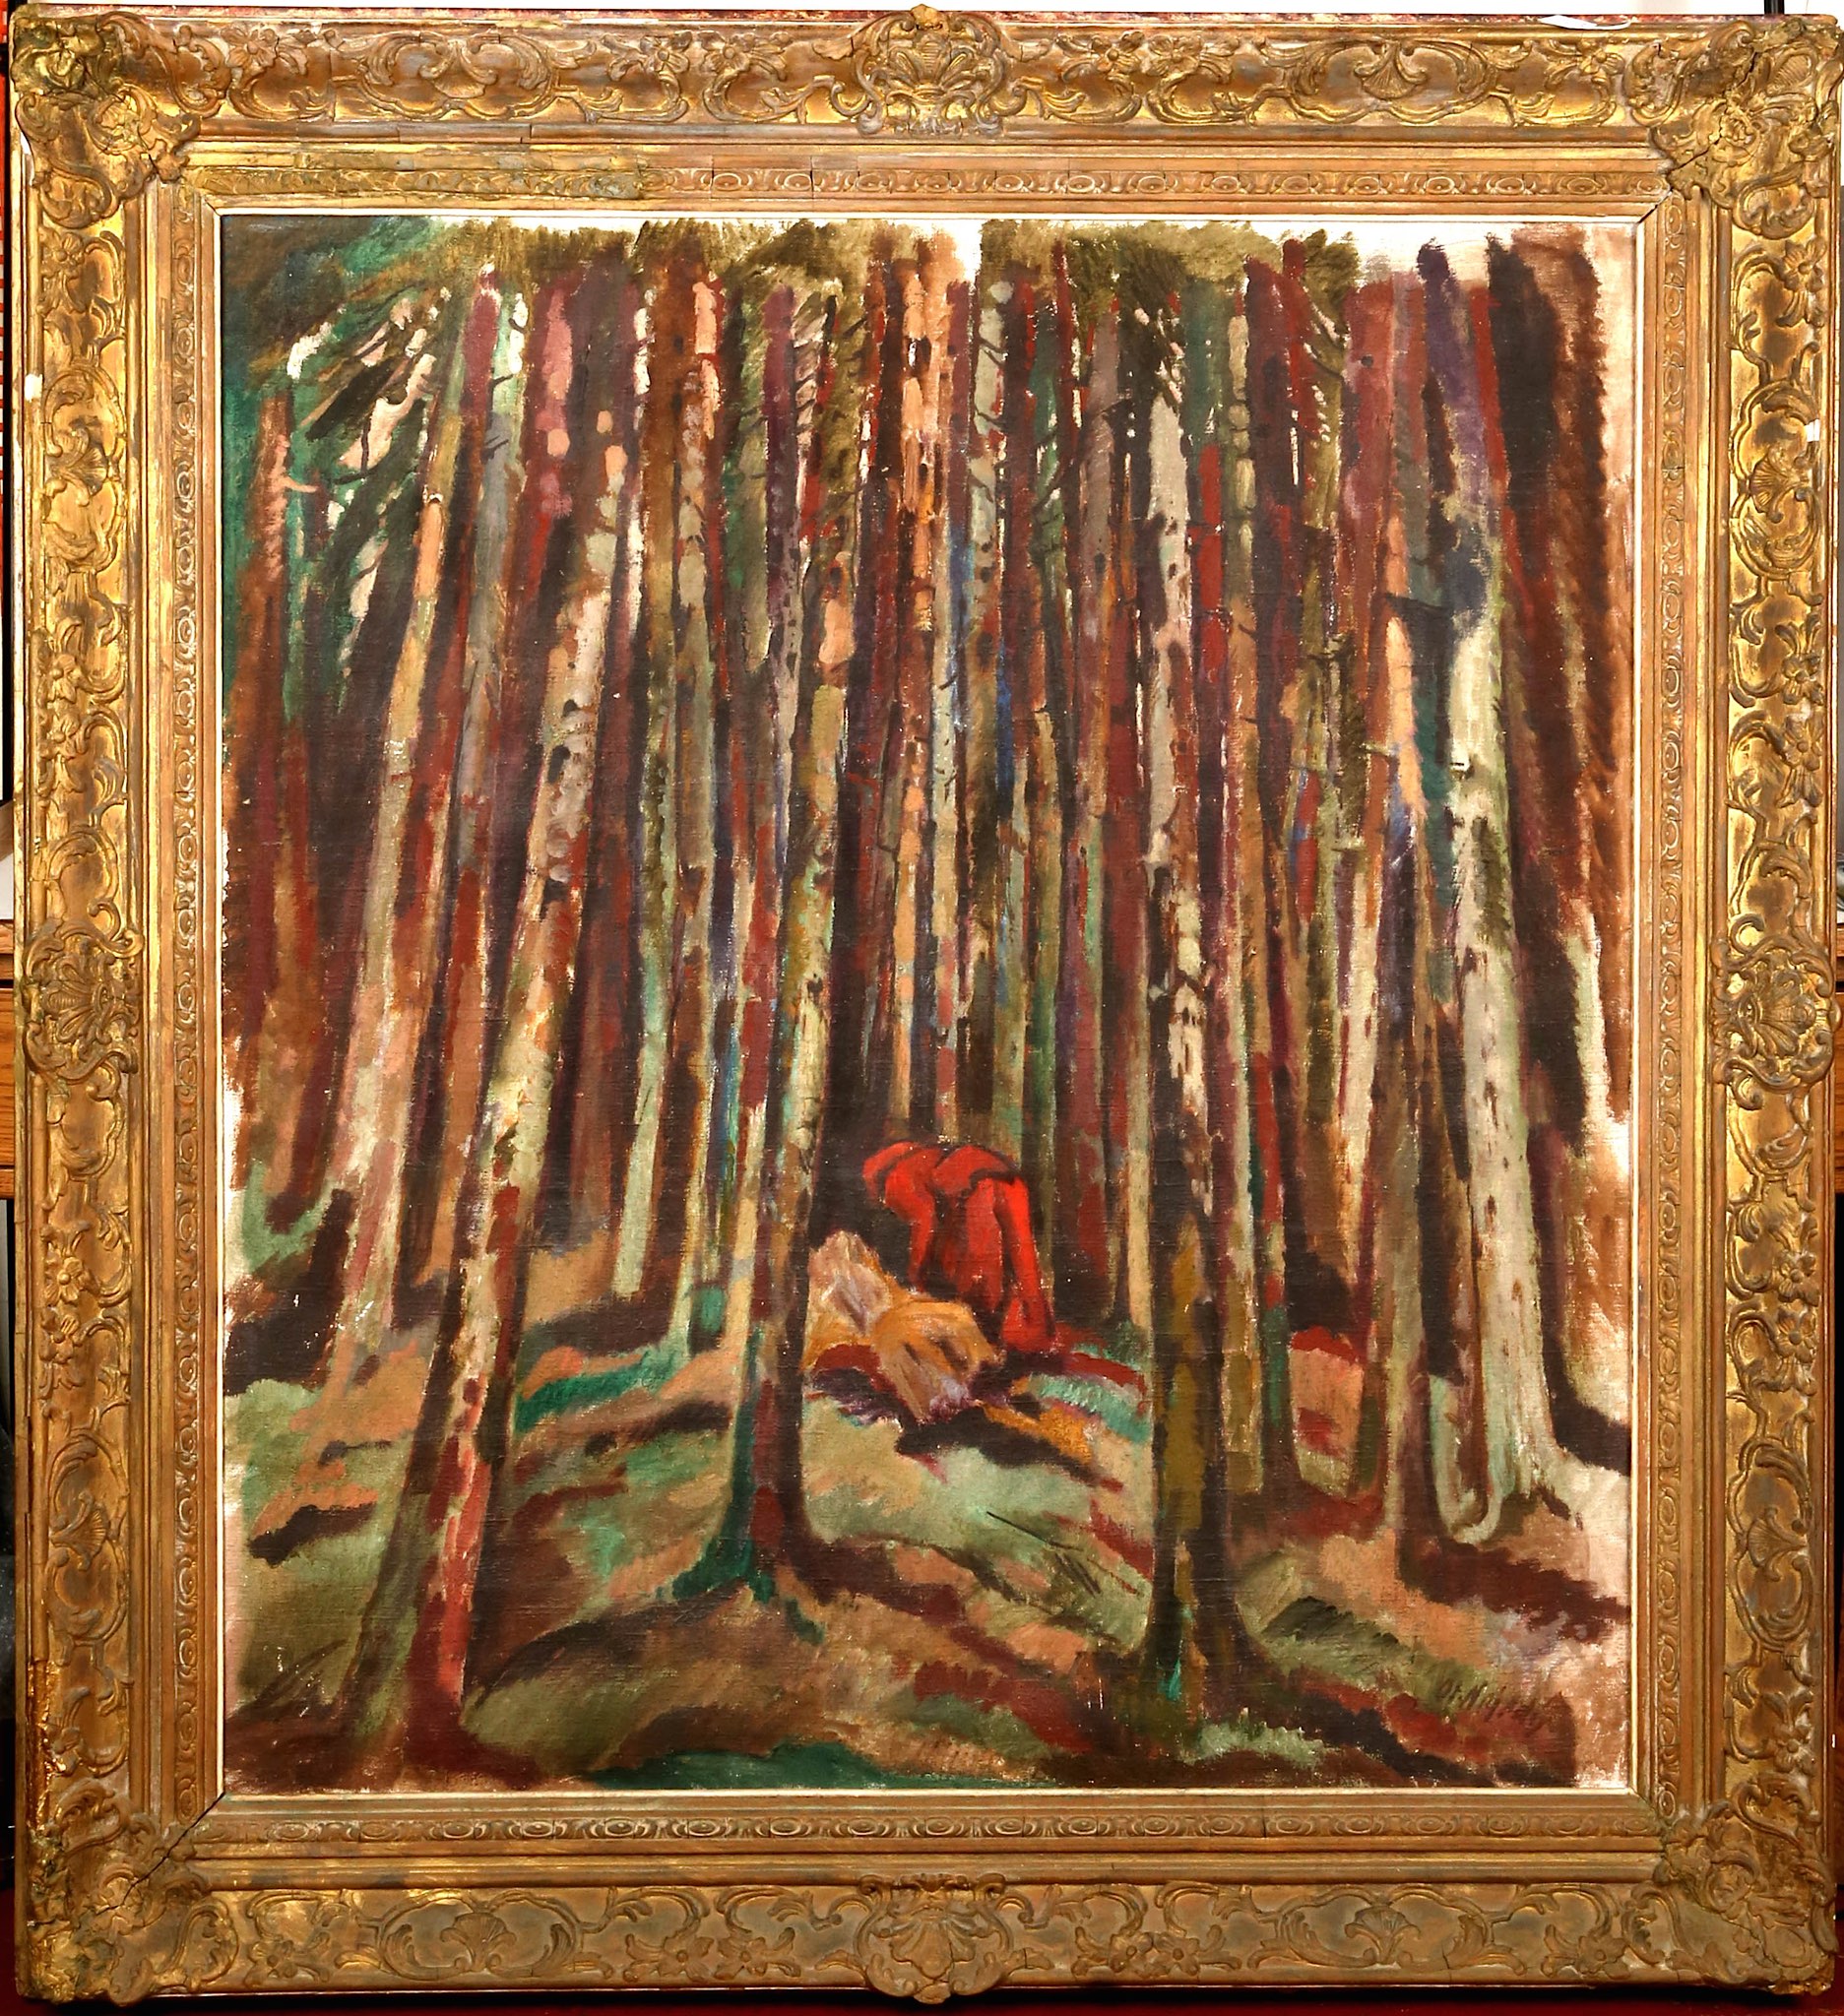 Otakar Nejedly (Czech; 1883-1957). 'The Wood Gatherer', oil on canvas. A red cloaked figure